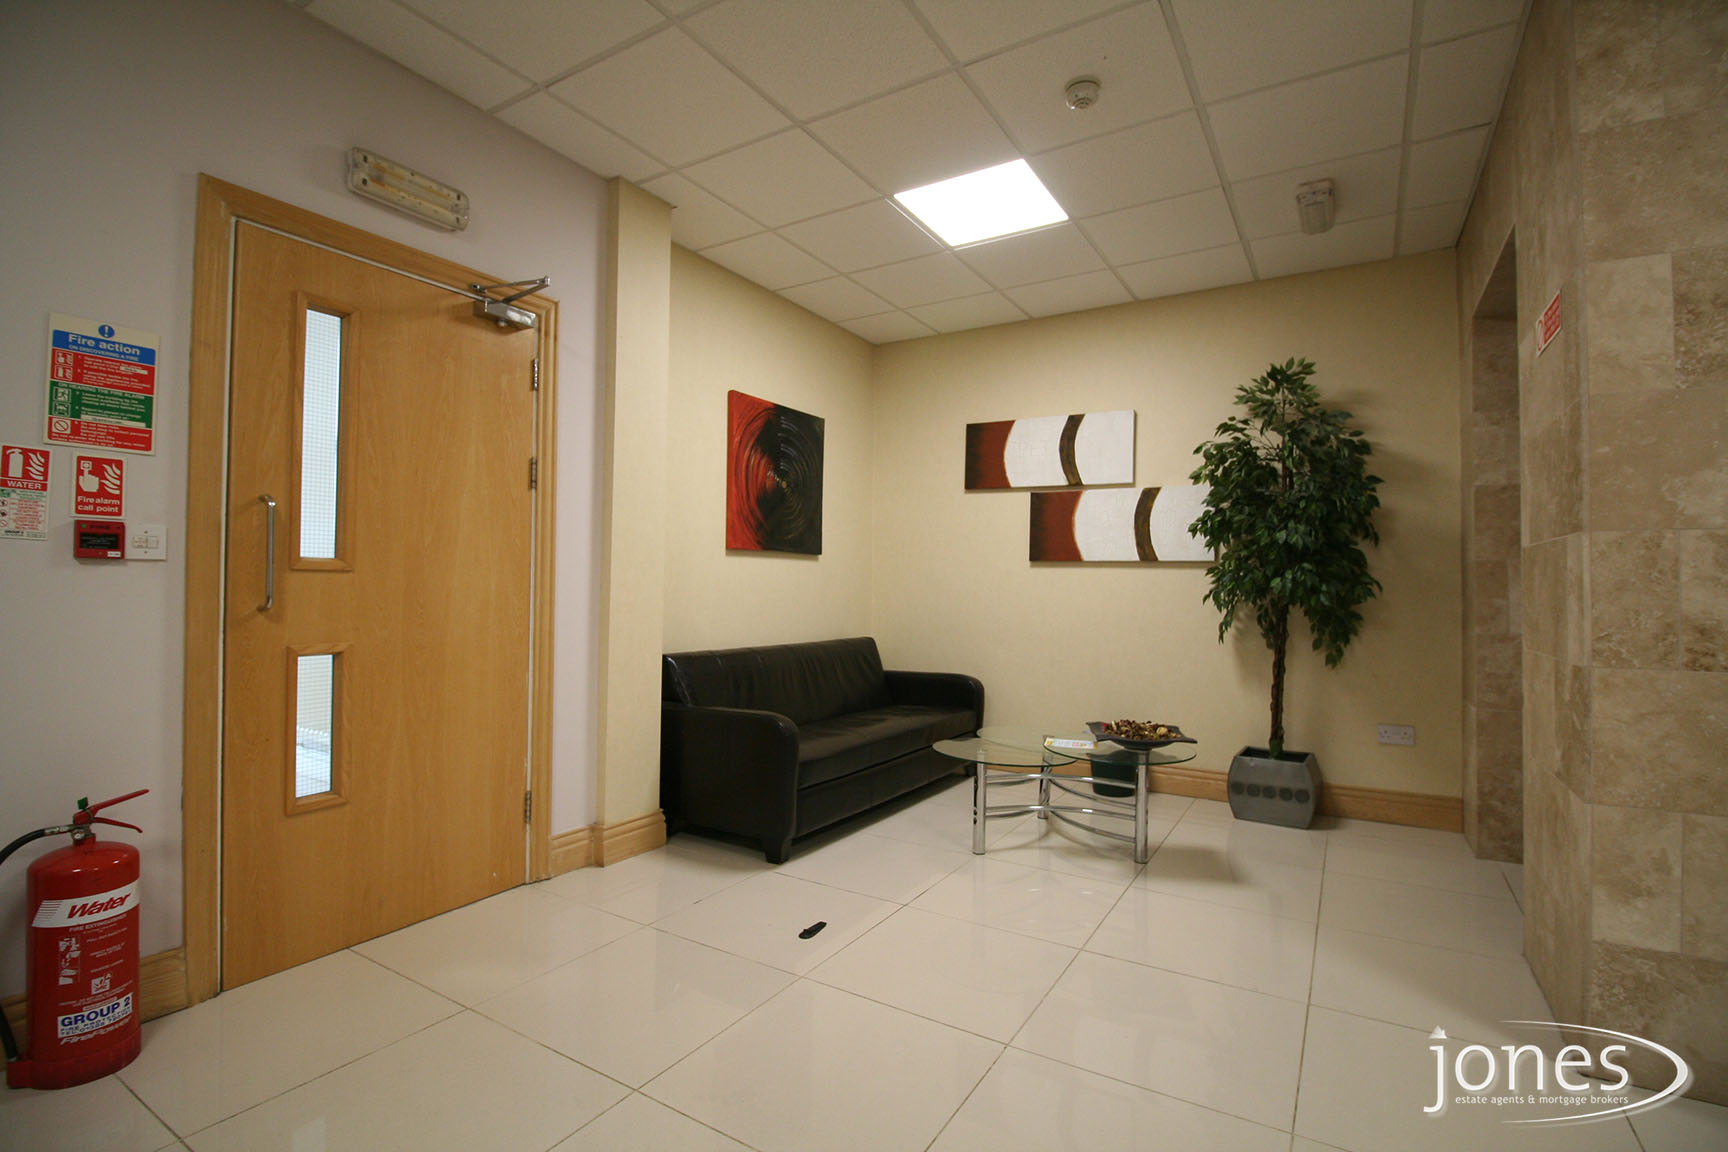 Home for Sale Let - Photo 05 Durham Tees Valley Business Centre Orde Wingate Way Primrose Hill Industrial Estate Stockton on Tees TS19 0GD